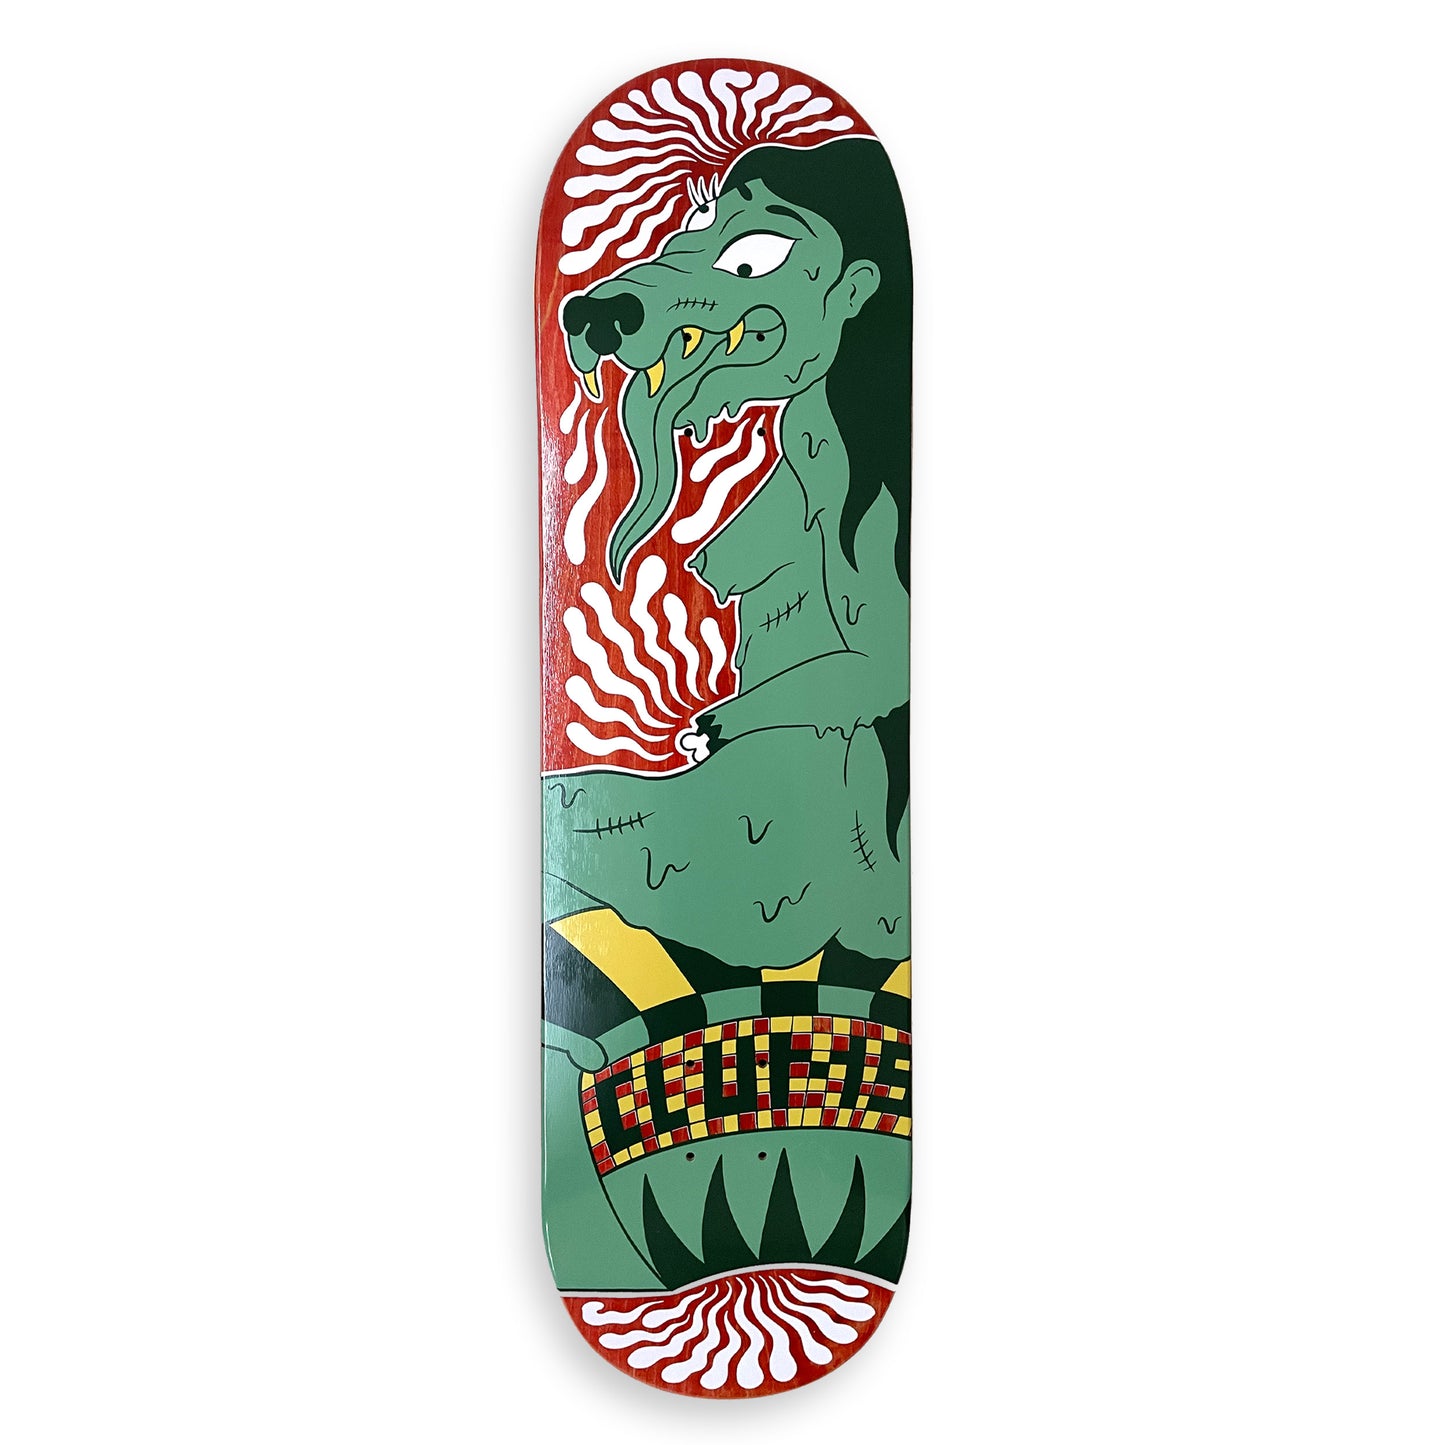 Clumsy skateboards Margelle 8.5"